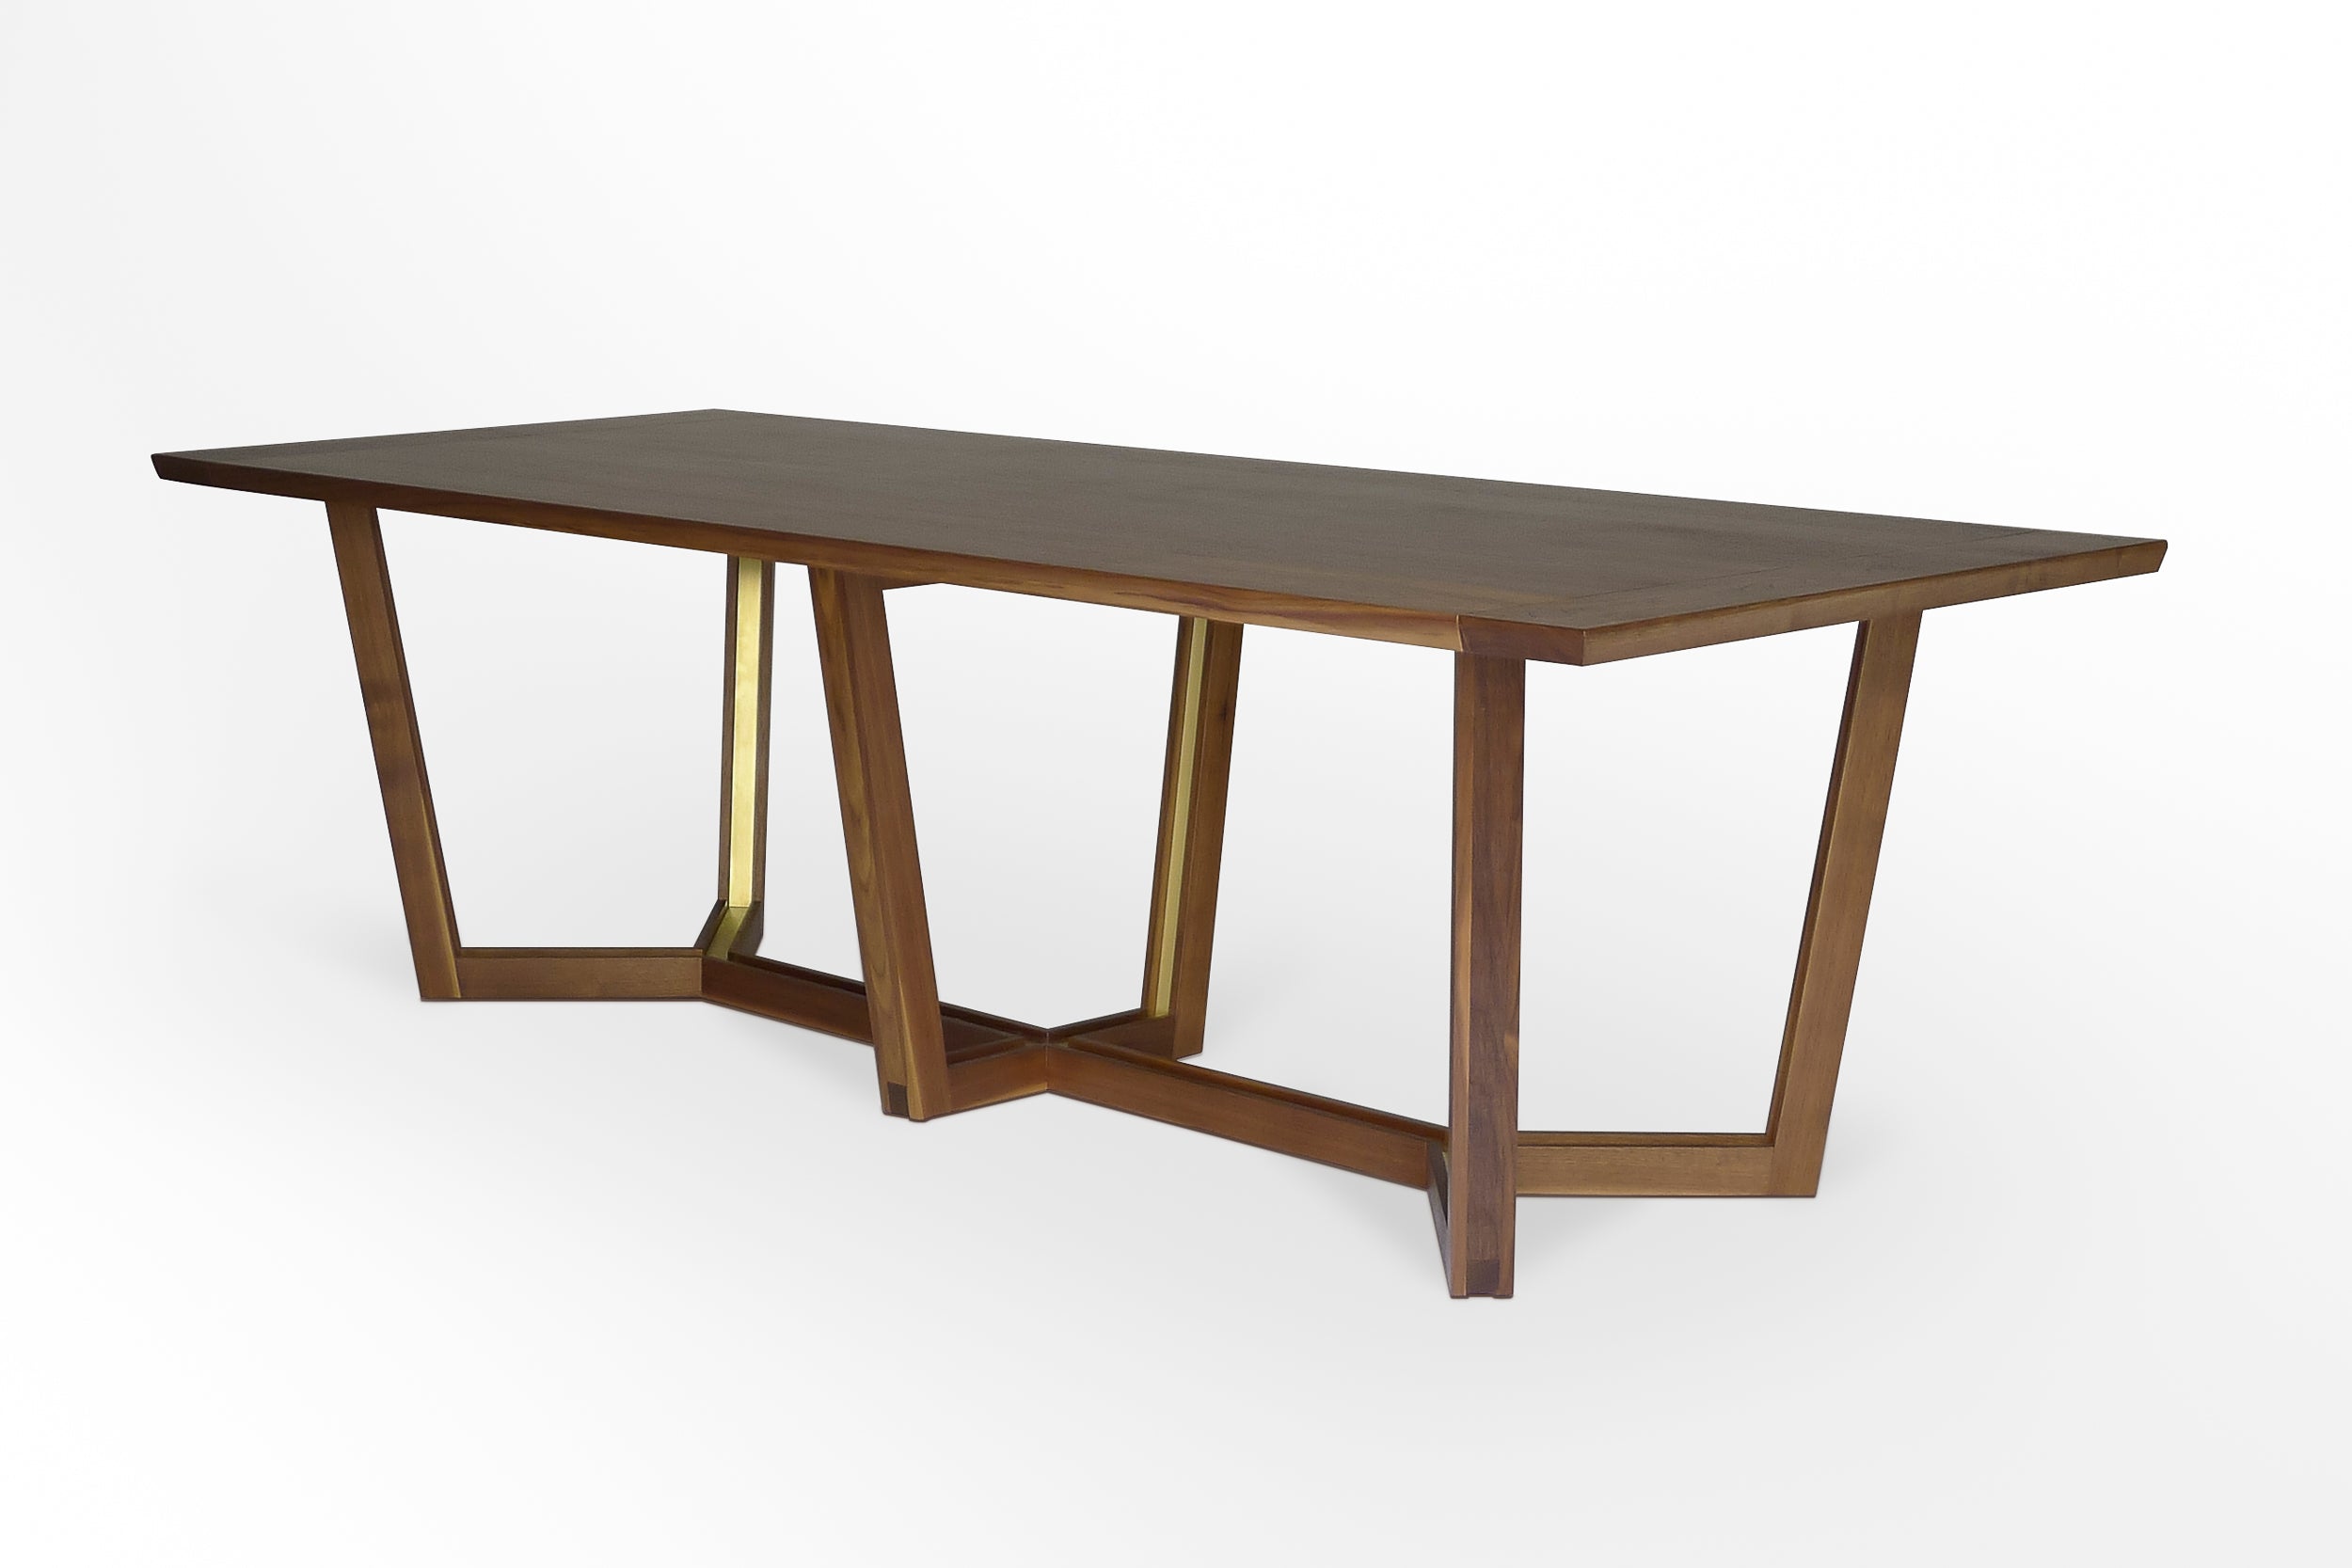 Boulevard midcentury modern walnut brass Dining Table handcrafted by Hunt & Noyer in Michigan